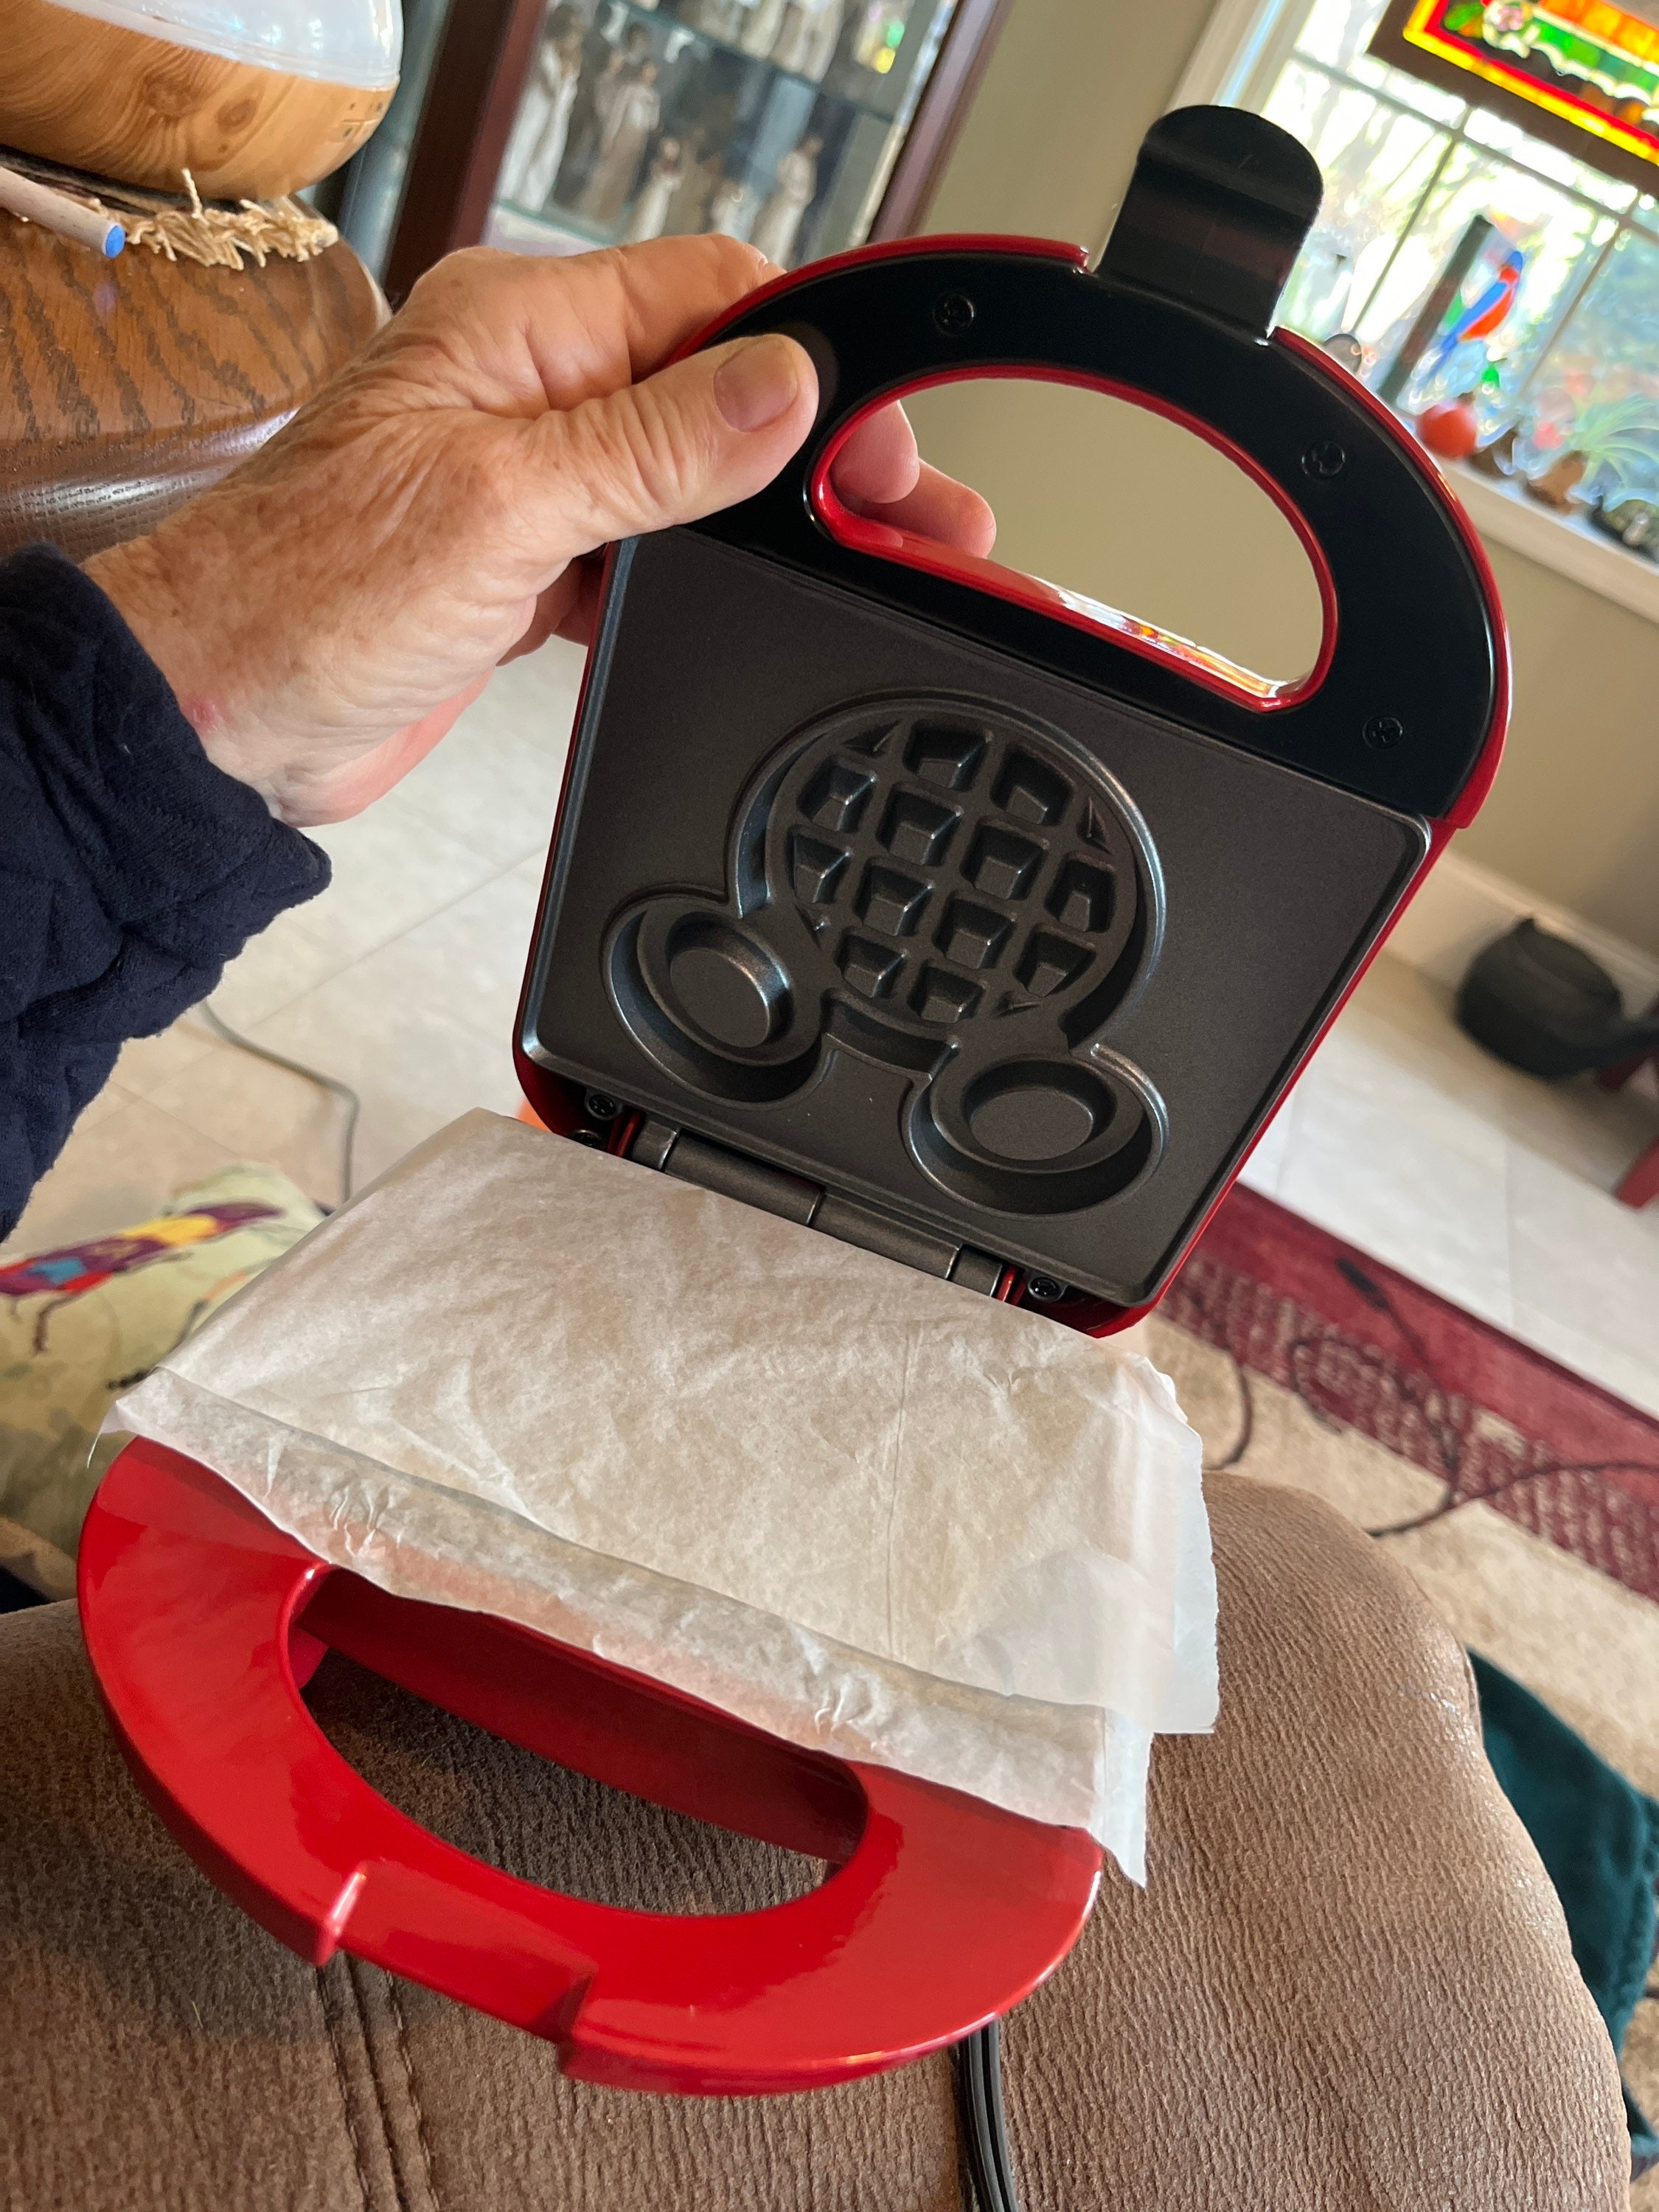 Mickey Mouse Waffle Iron,excellent Condition,new, Measures 11l,7.5